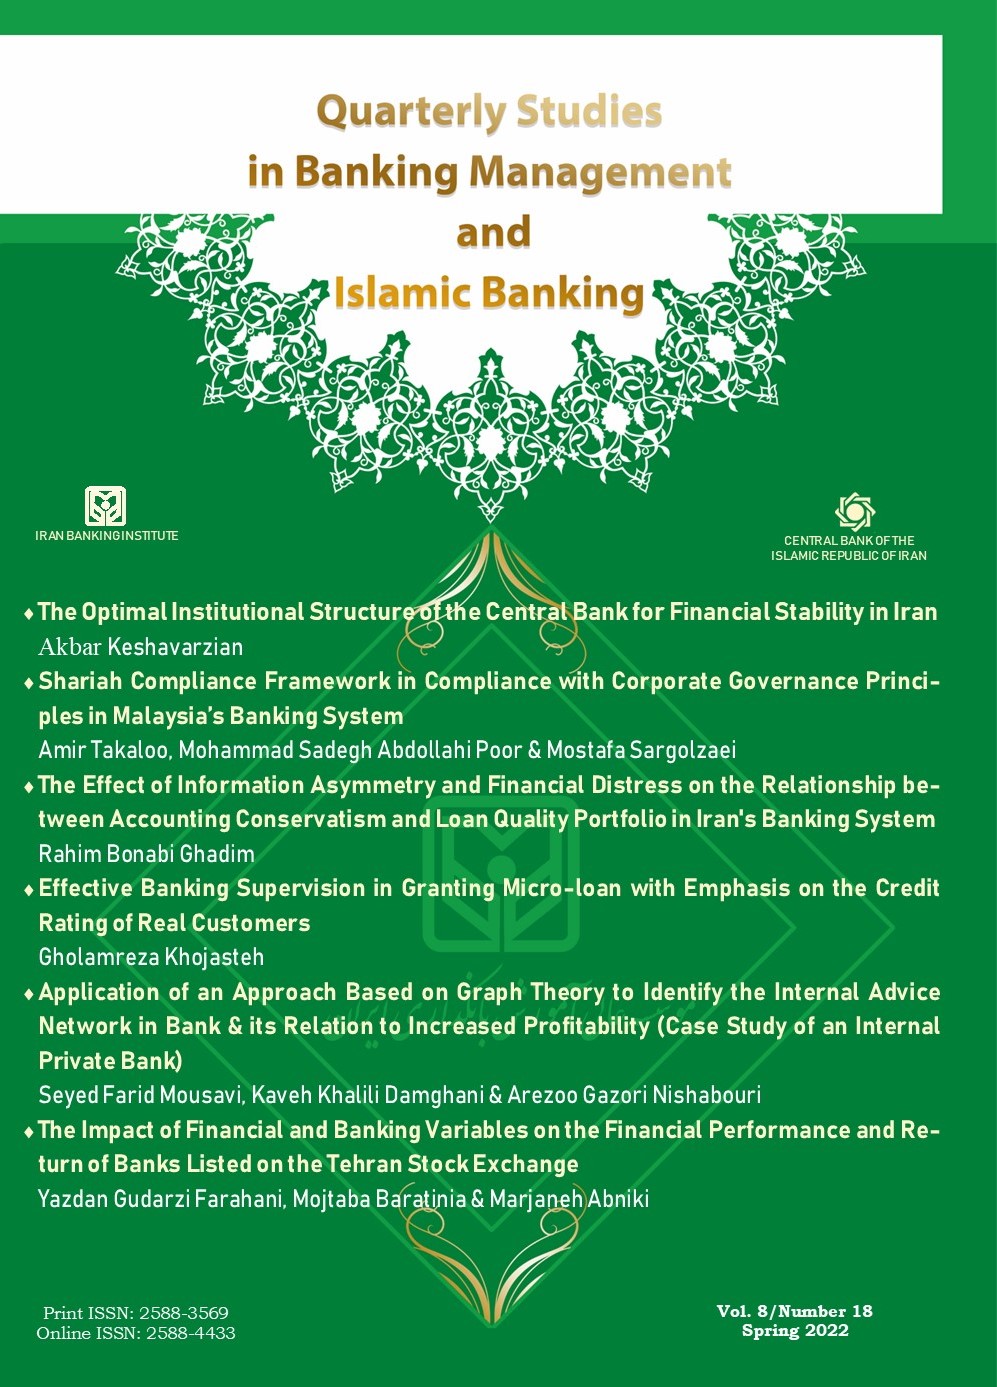 Quarterly Studies in Banking Management and Islamic Banking